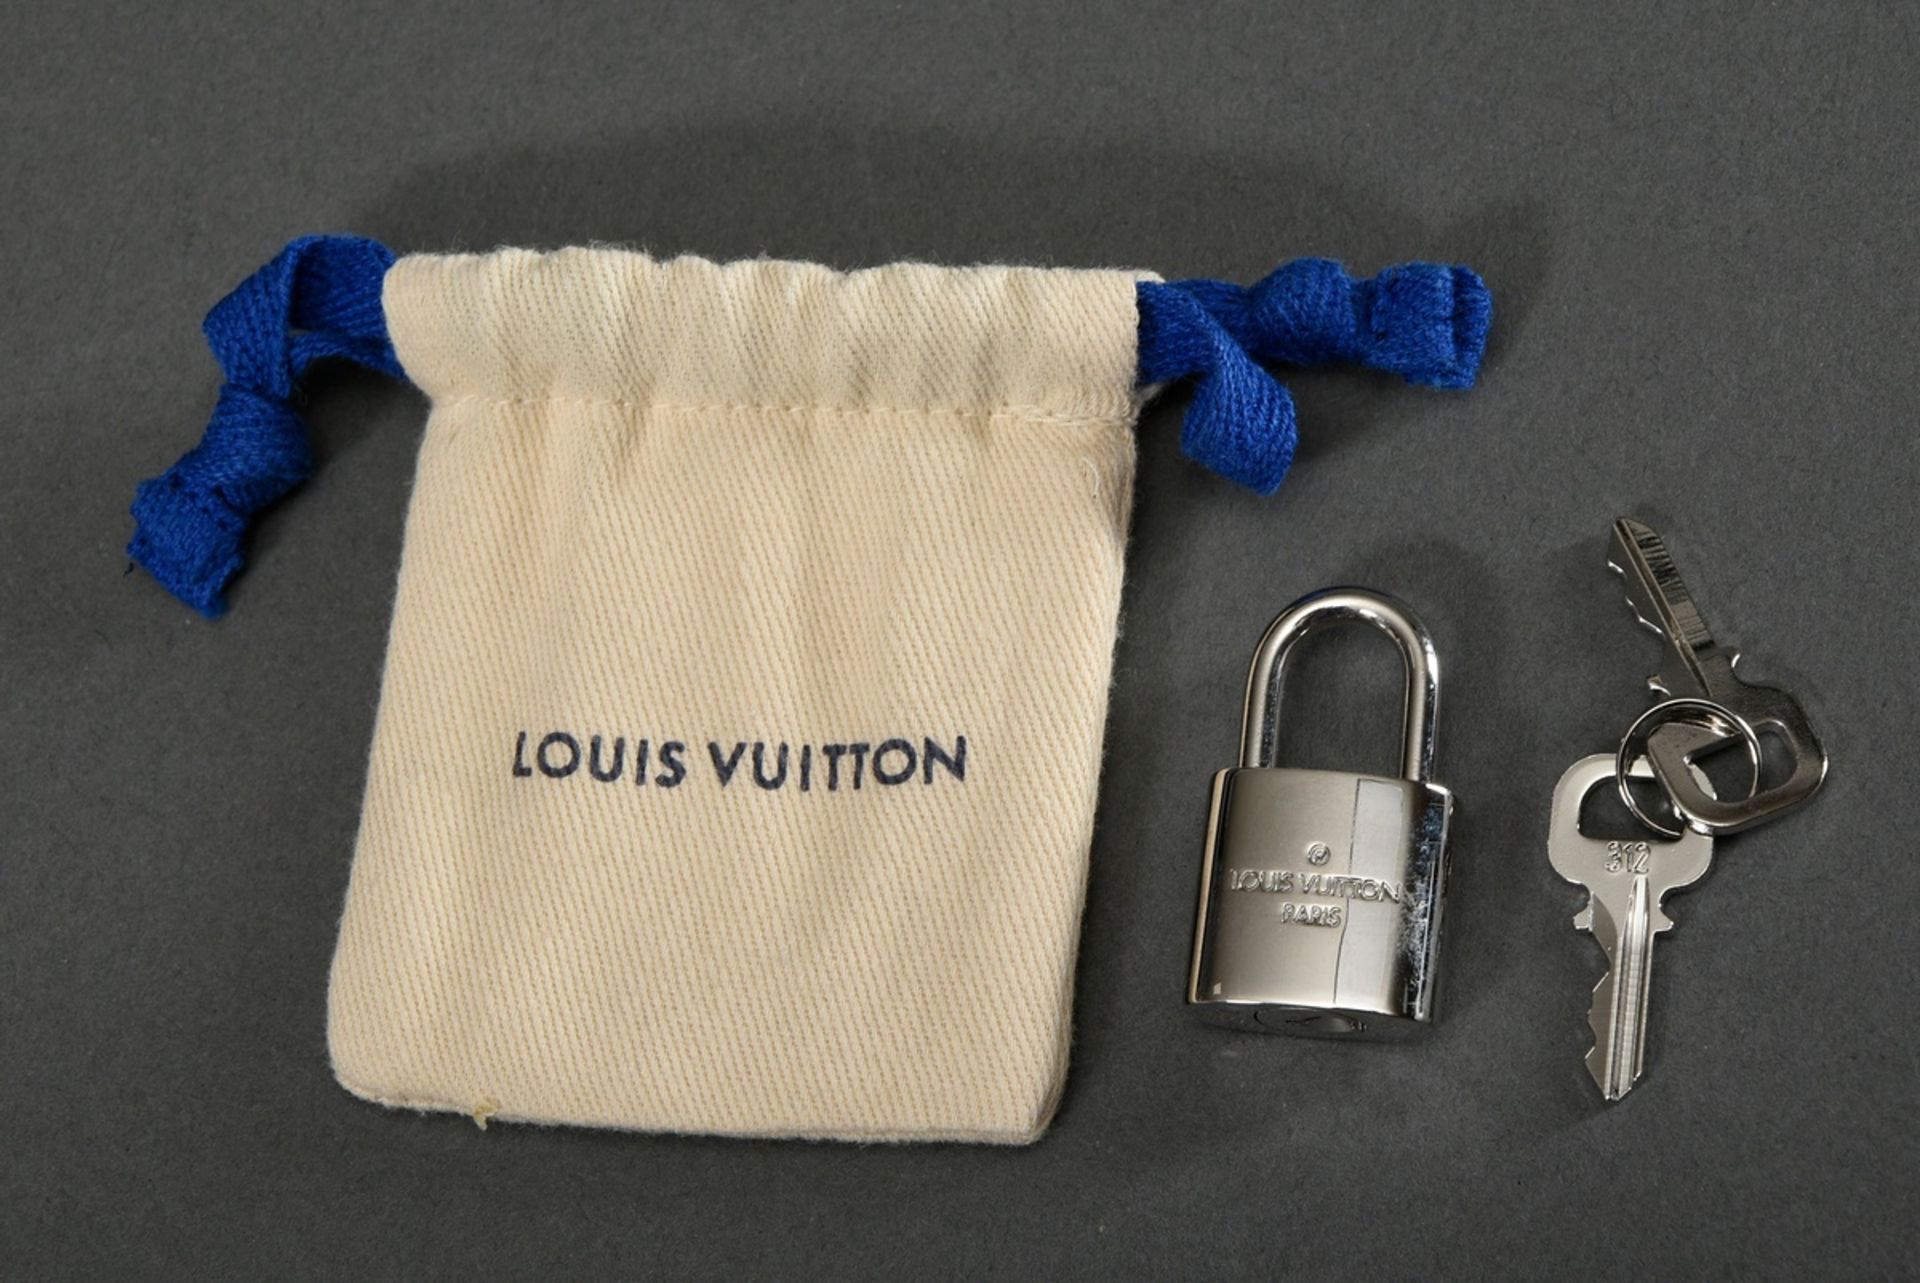 Louis Vuitton "Keepall 50" in Epi black, Damier graphite and raised Brand lettering on blue and whi - Image 7 of 9